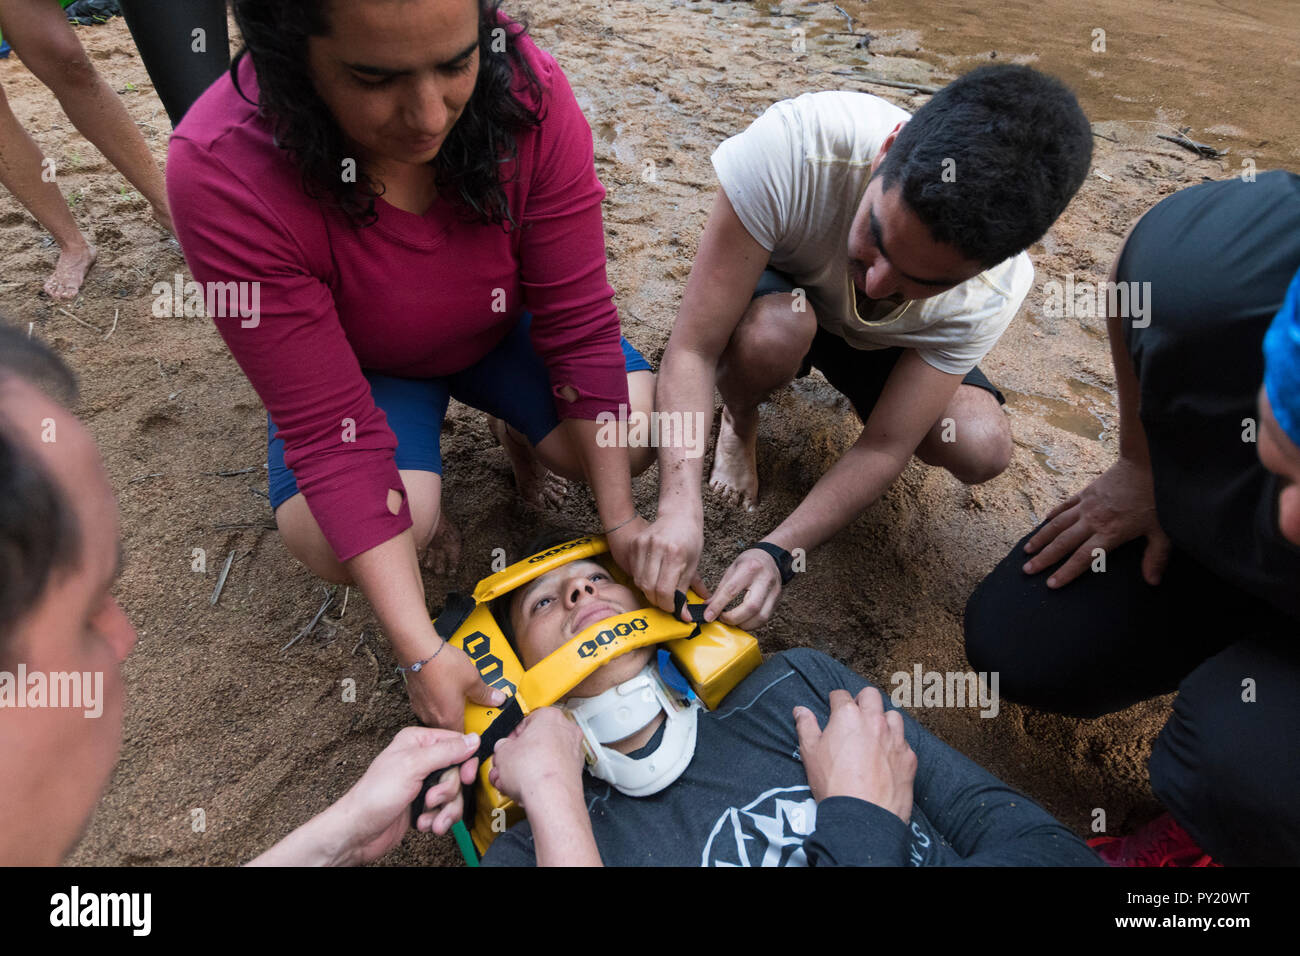 Head immobilizer being secured during a backboard evacuation drill in a wilderness first responder WFR course, El Aguacero waterfall, Chiapas, Mexico Stock Photo